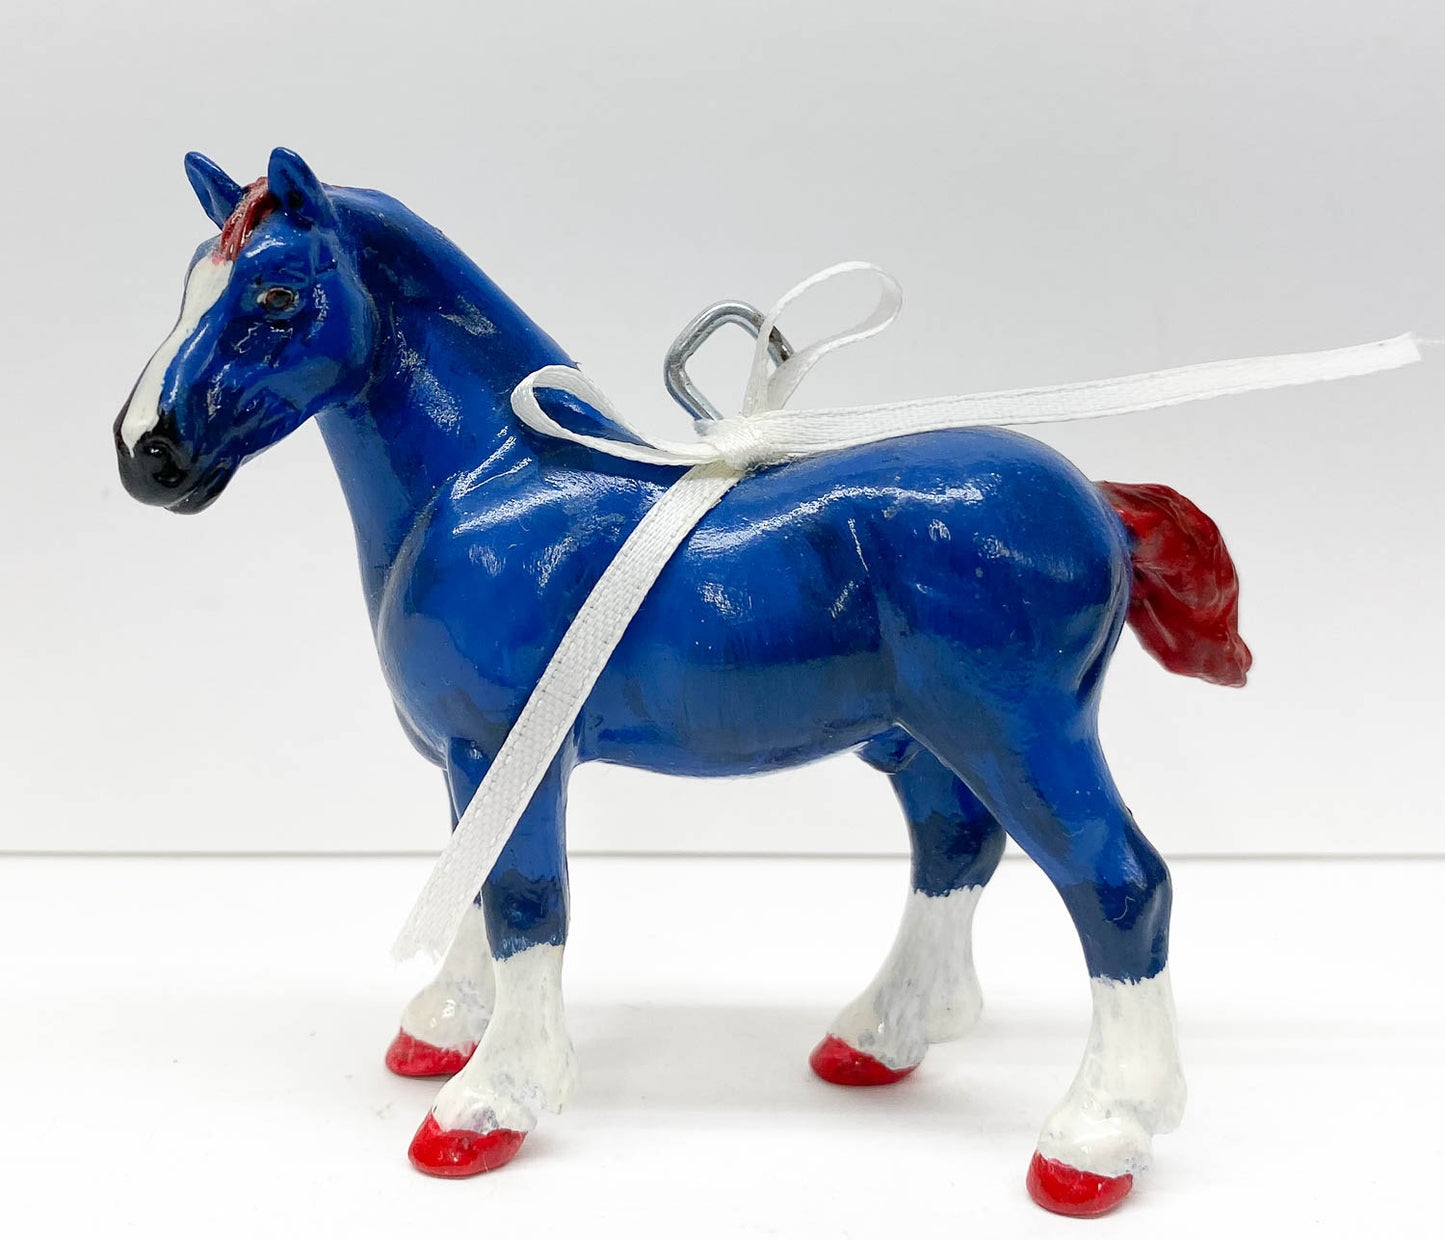 Vaulting Draft Horse - Custom, Red, White, and Blue Ornament